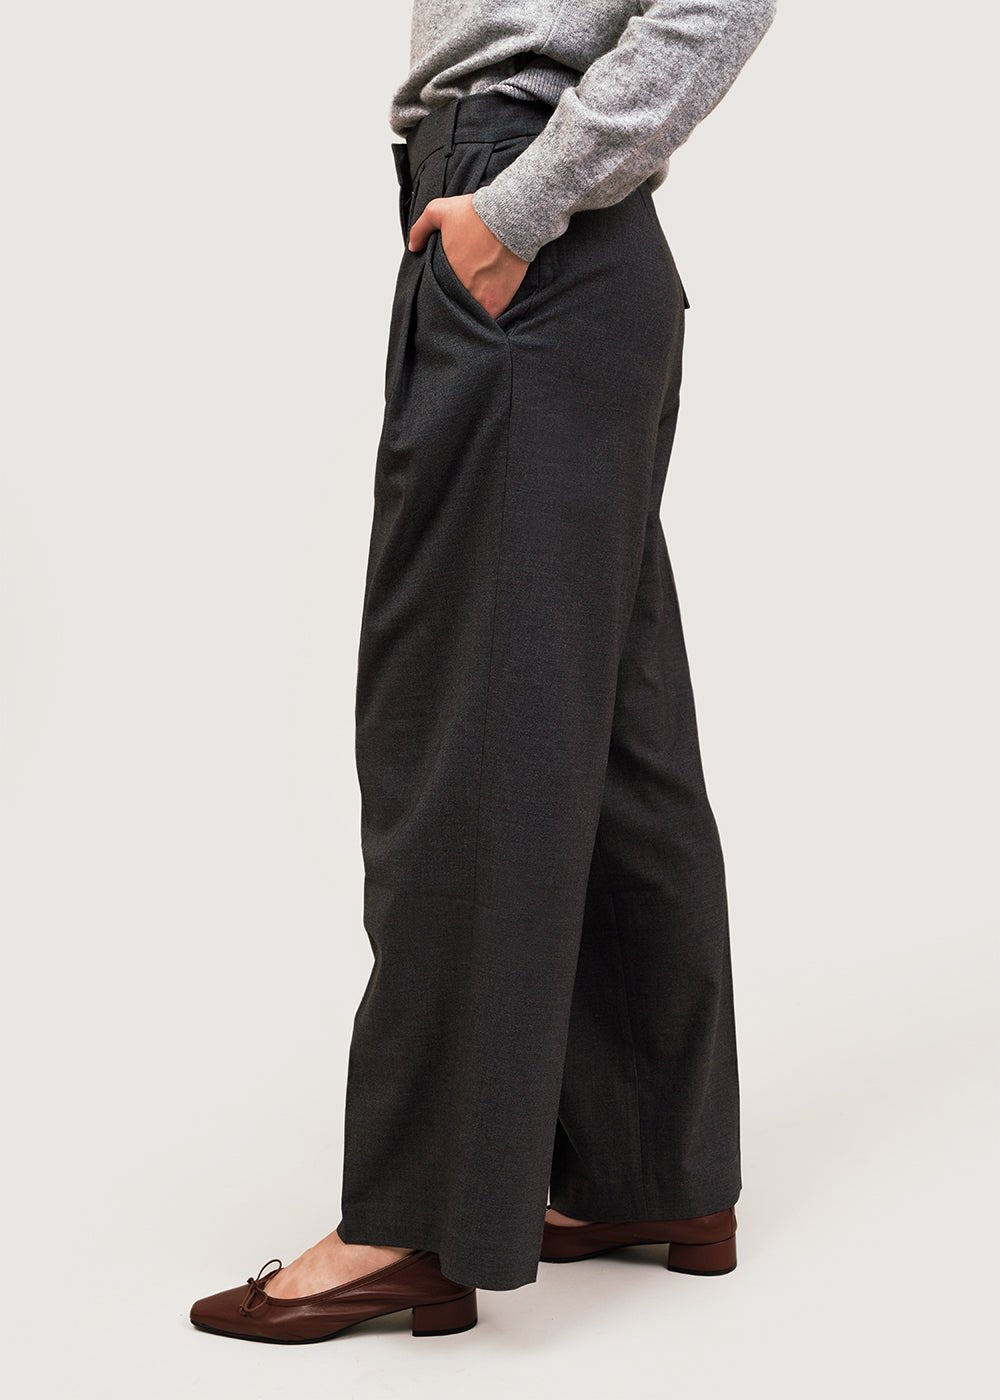 Mijeong Park Charcoal Pleat Front Wide Leg Pants - New Classics Studios Sustainable Ethical Fashion Canada